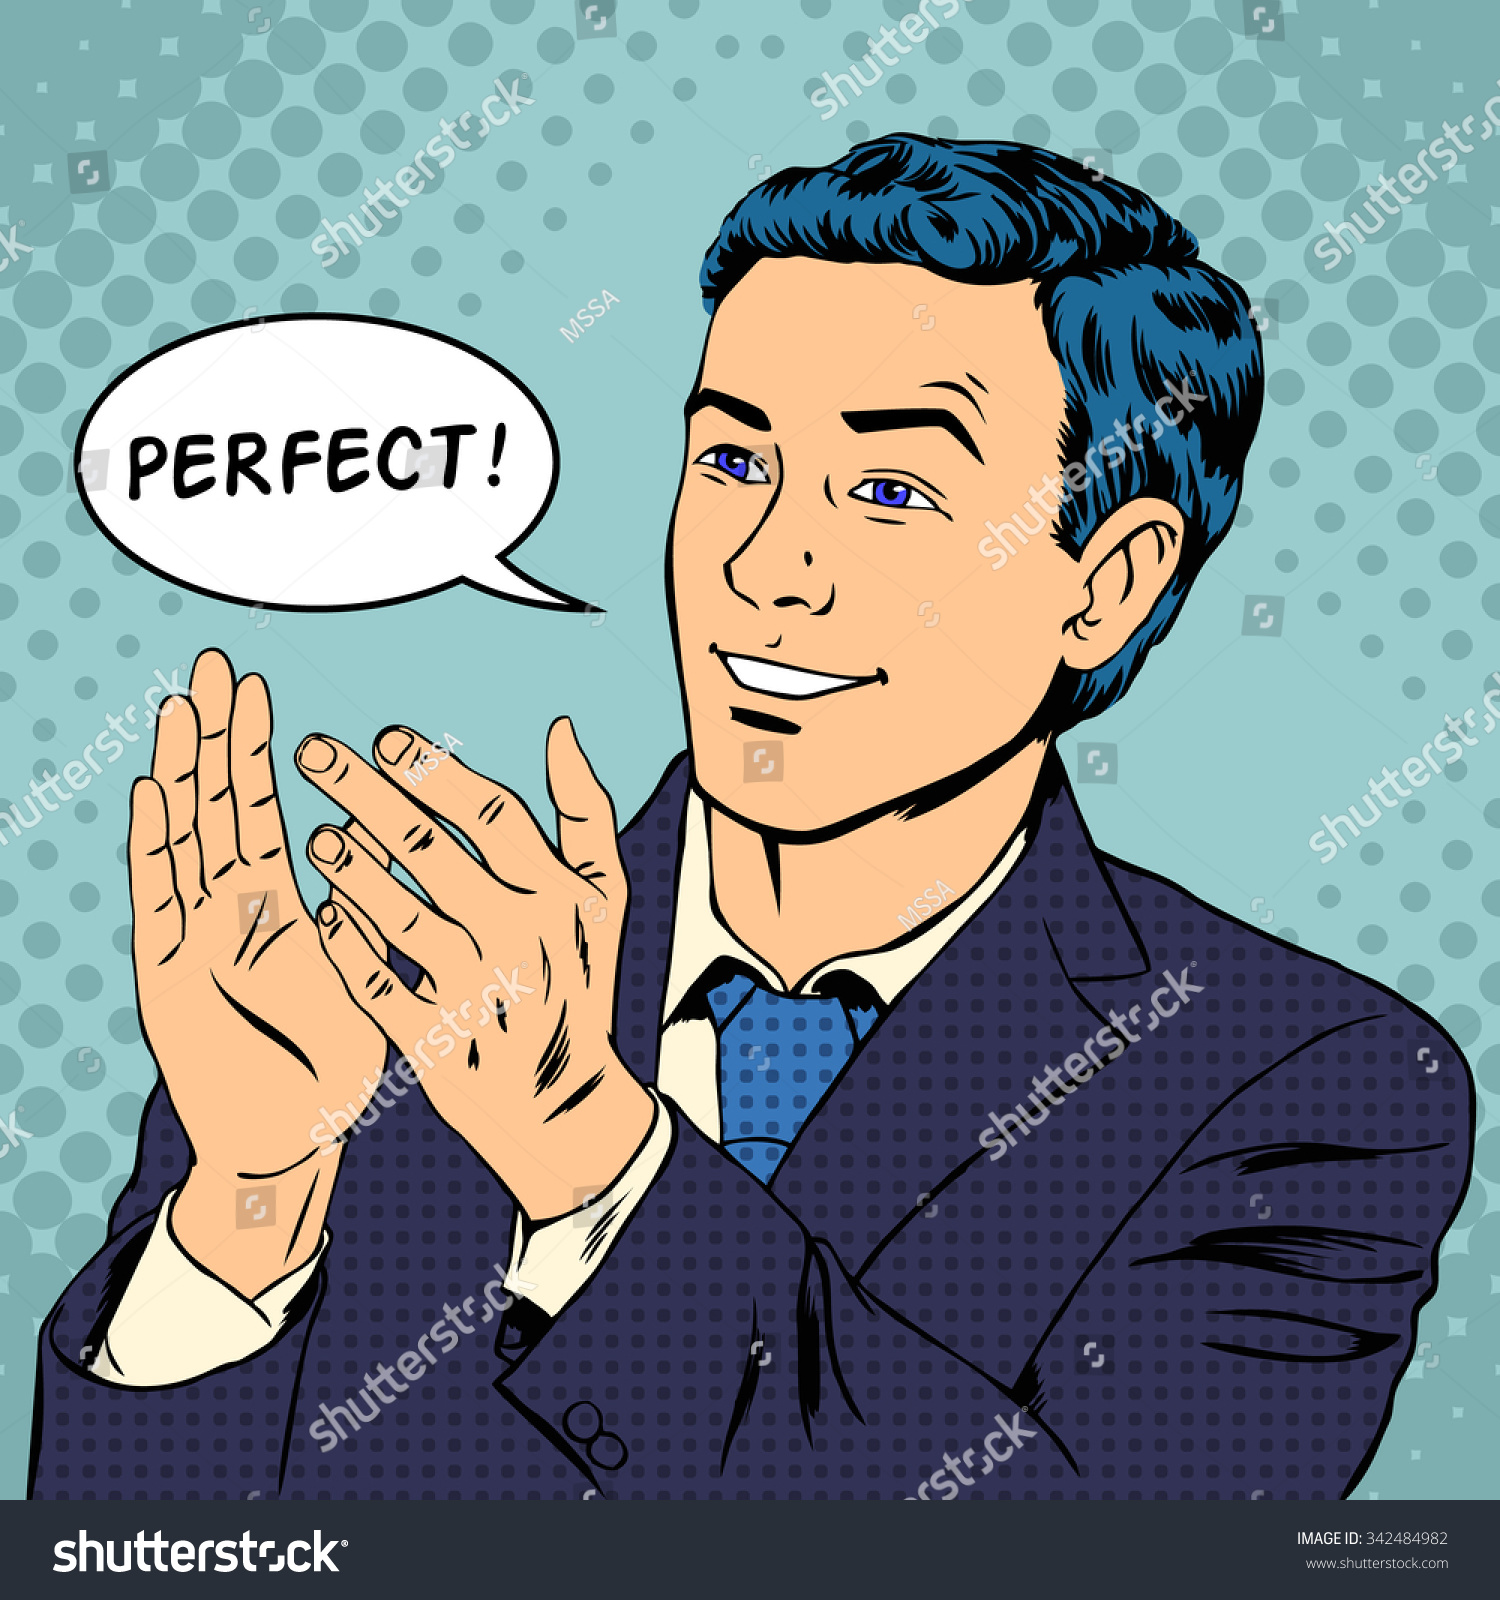 stock-vector-man-applauds-and-says-perfe